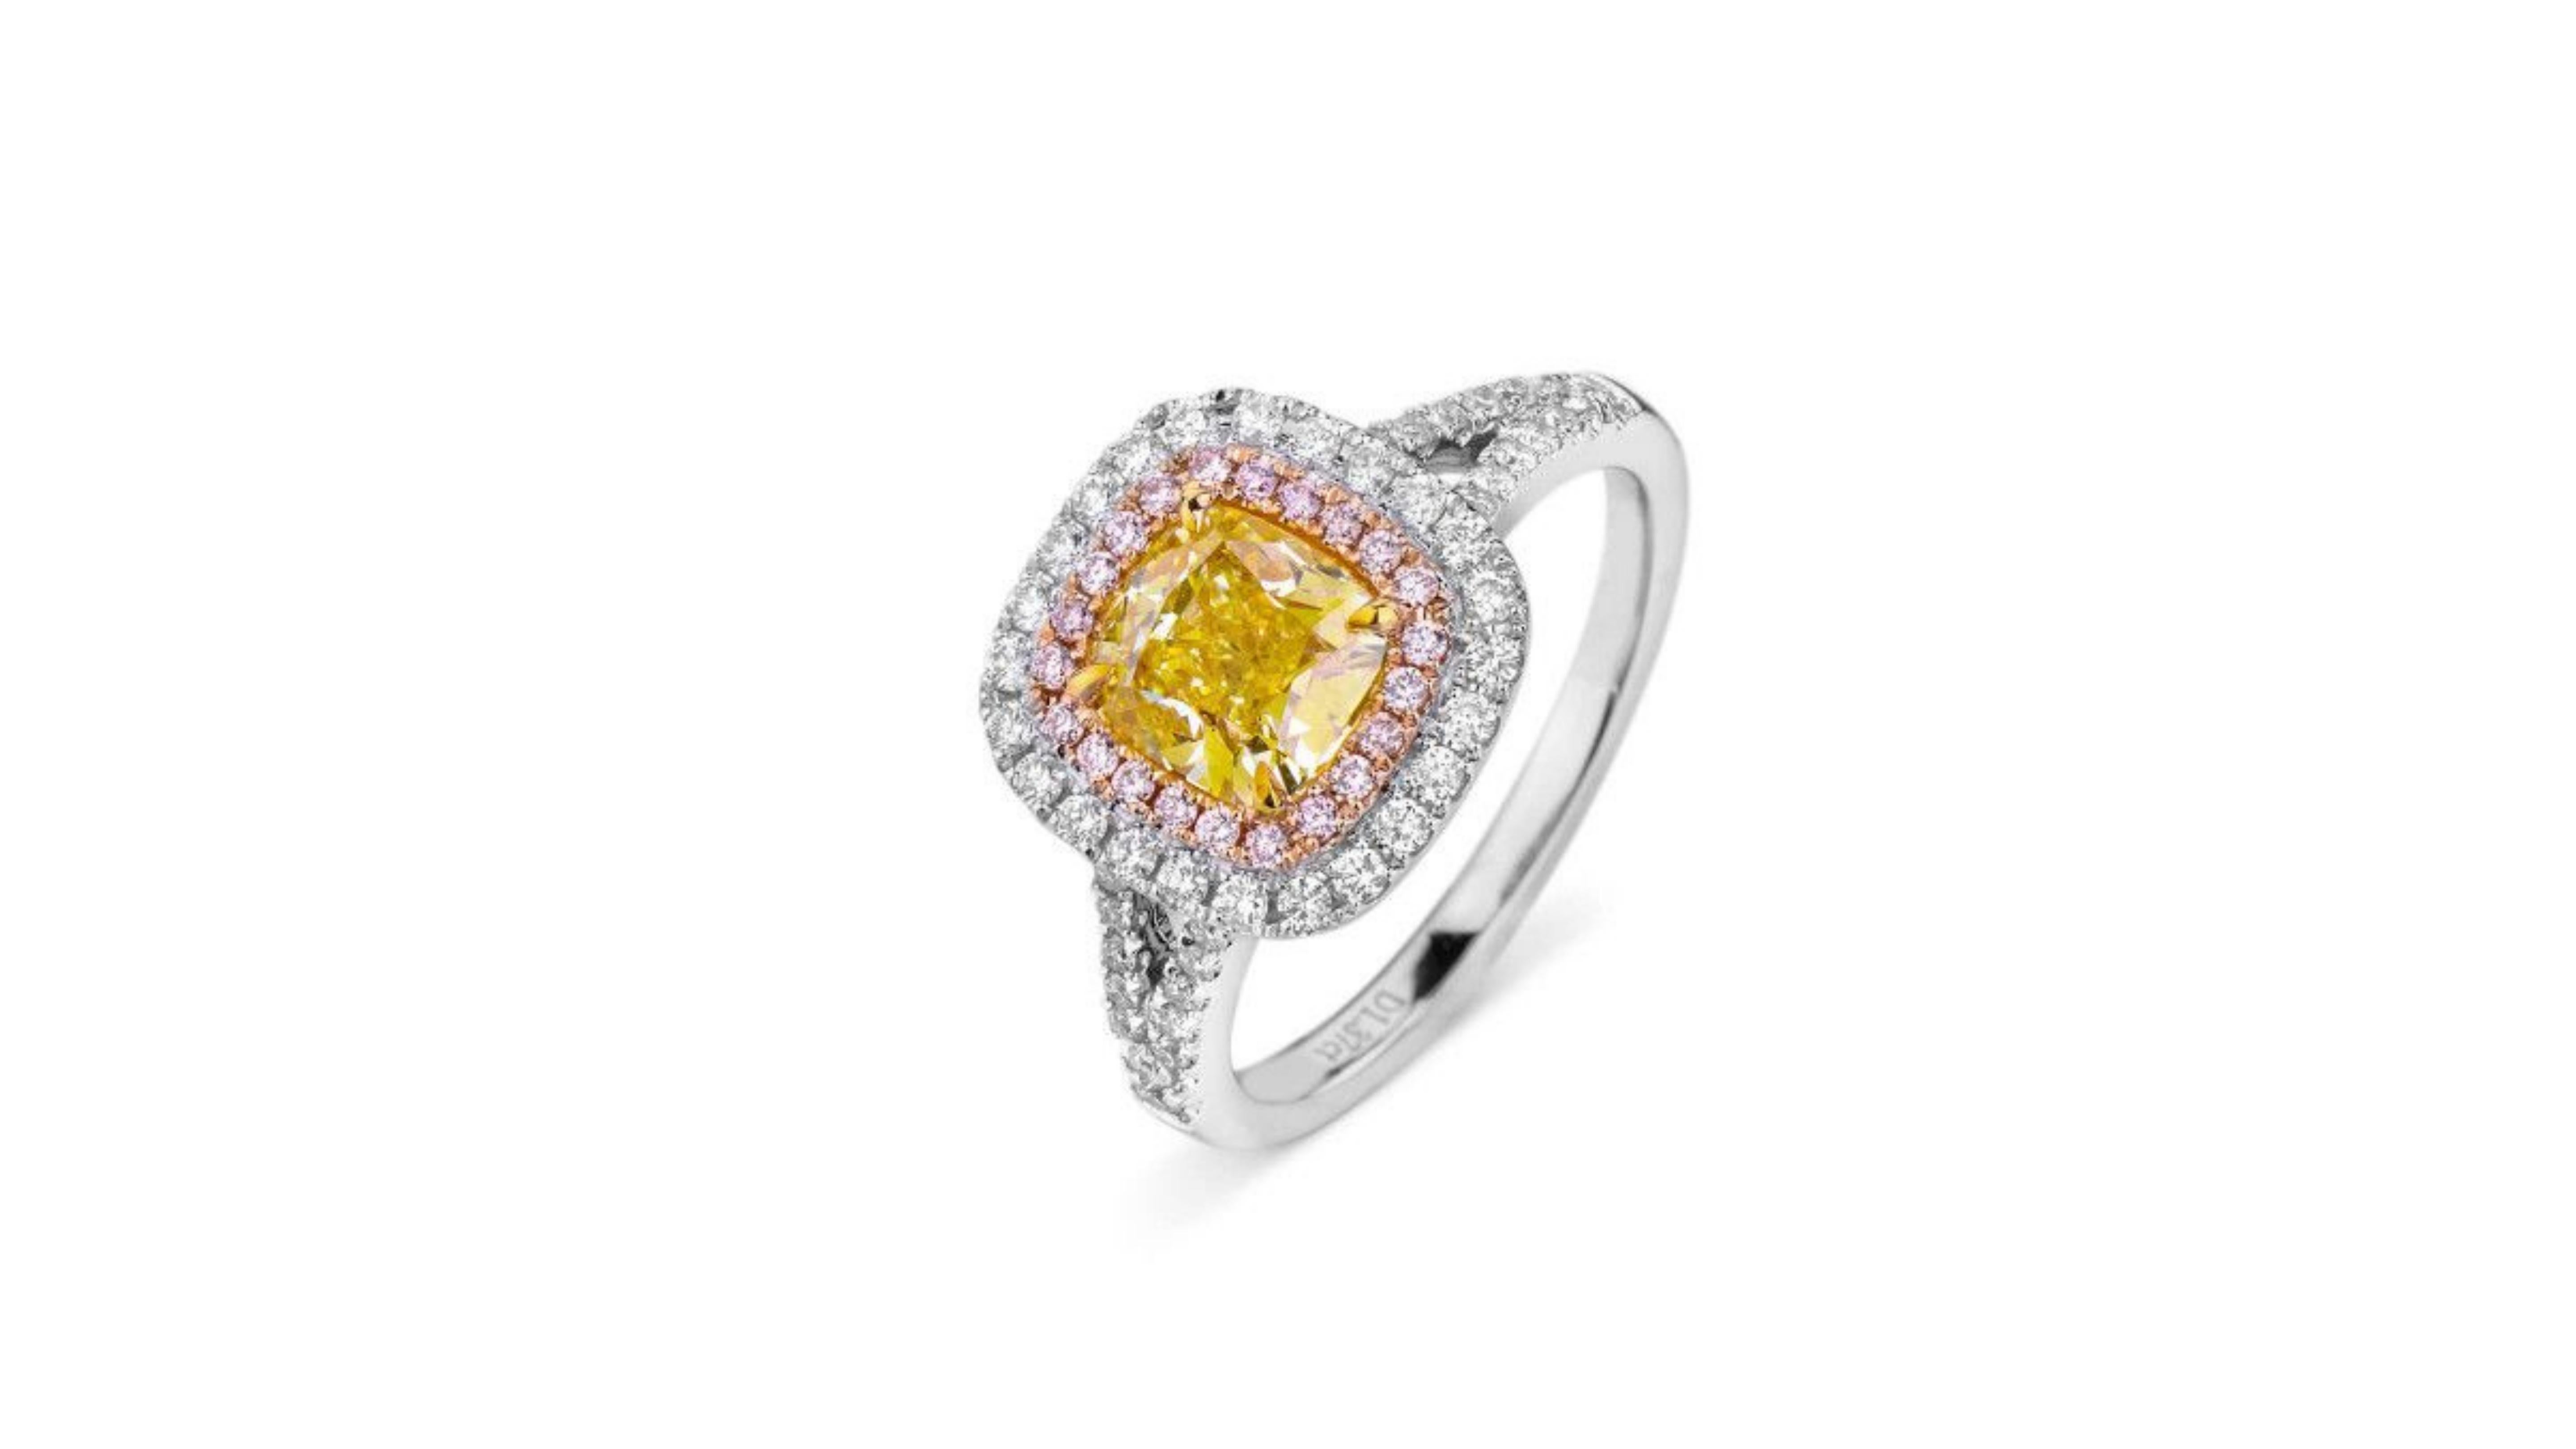 
This is a  1.37-Carat Cushion Cut Fancy Yellow VS2  set in  18K Gold with 52 Brilliant G-H VS Natural Diamonds Totaling 0.36 Carats and 22 Brilliant Fancy Pink VS Diamonds with a GIA Certificate .  Very unique and if you are looking for anything